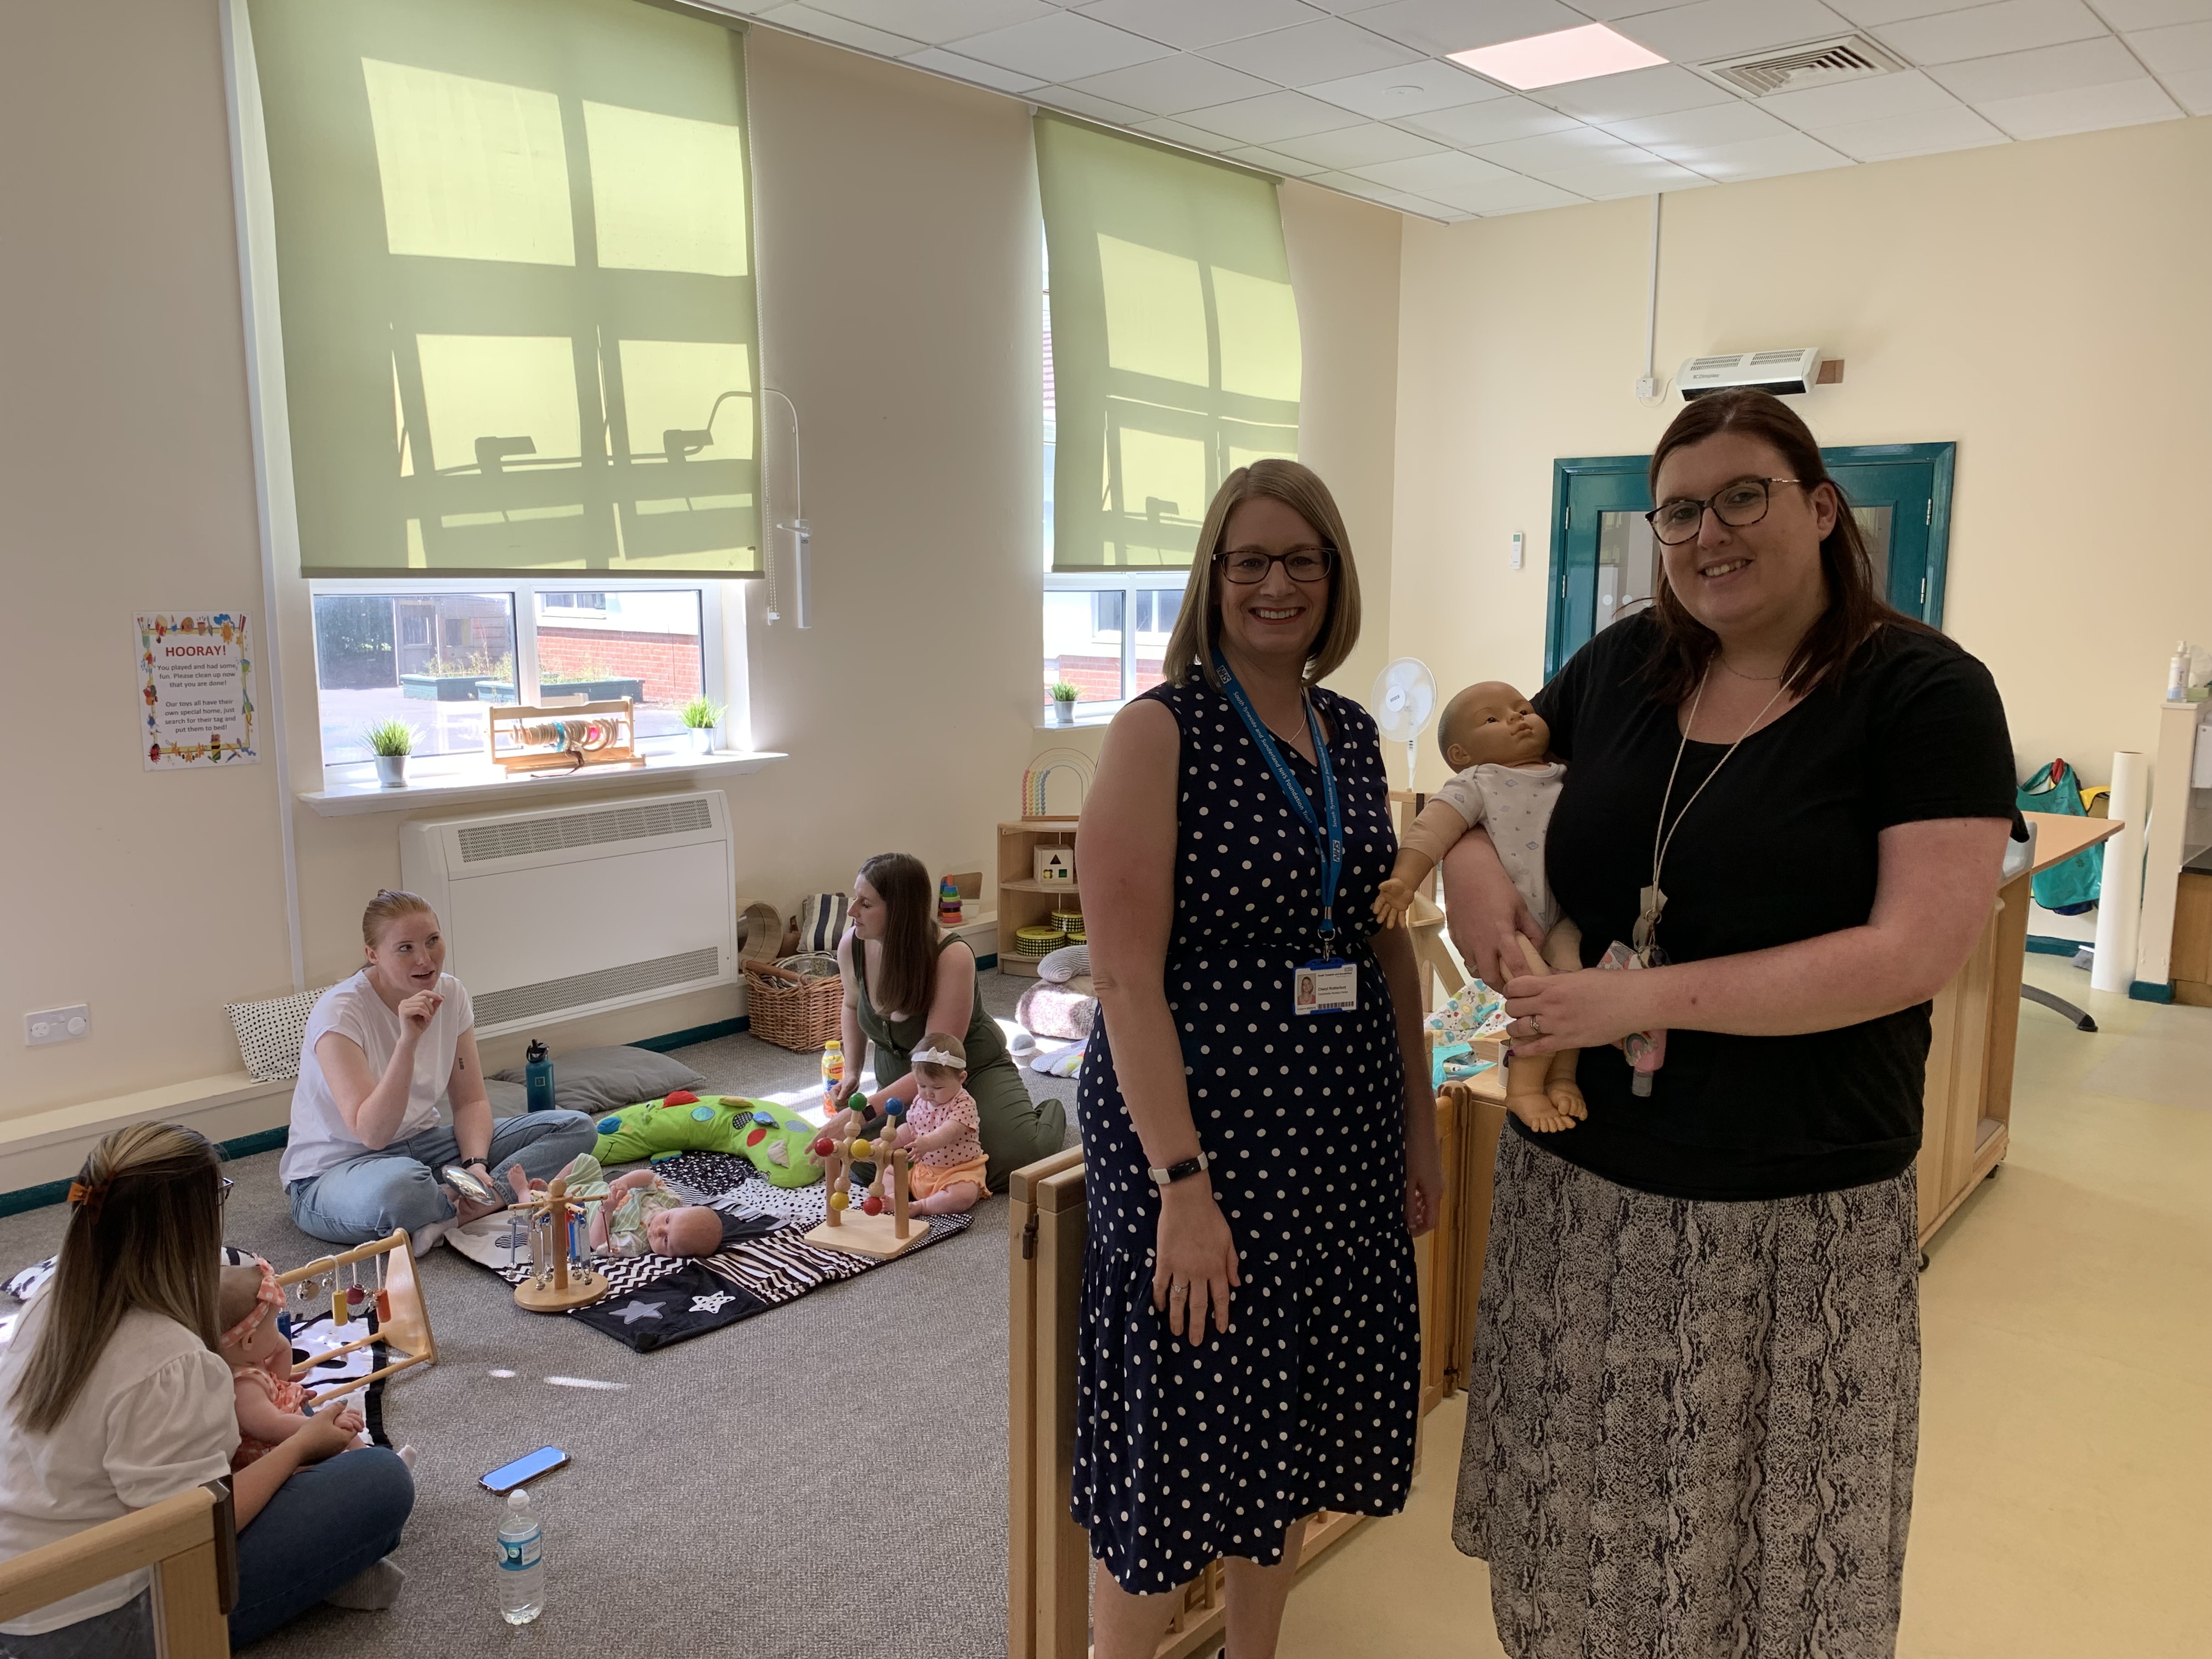 Cheryl Rutherford, a Community Nursery Nurse for South Tyneside and Sunderland NHS Foundation Trust, and Gemma Maughan, Outreach Worker for South Tyneside Council, with the Hebburn group..jpg